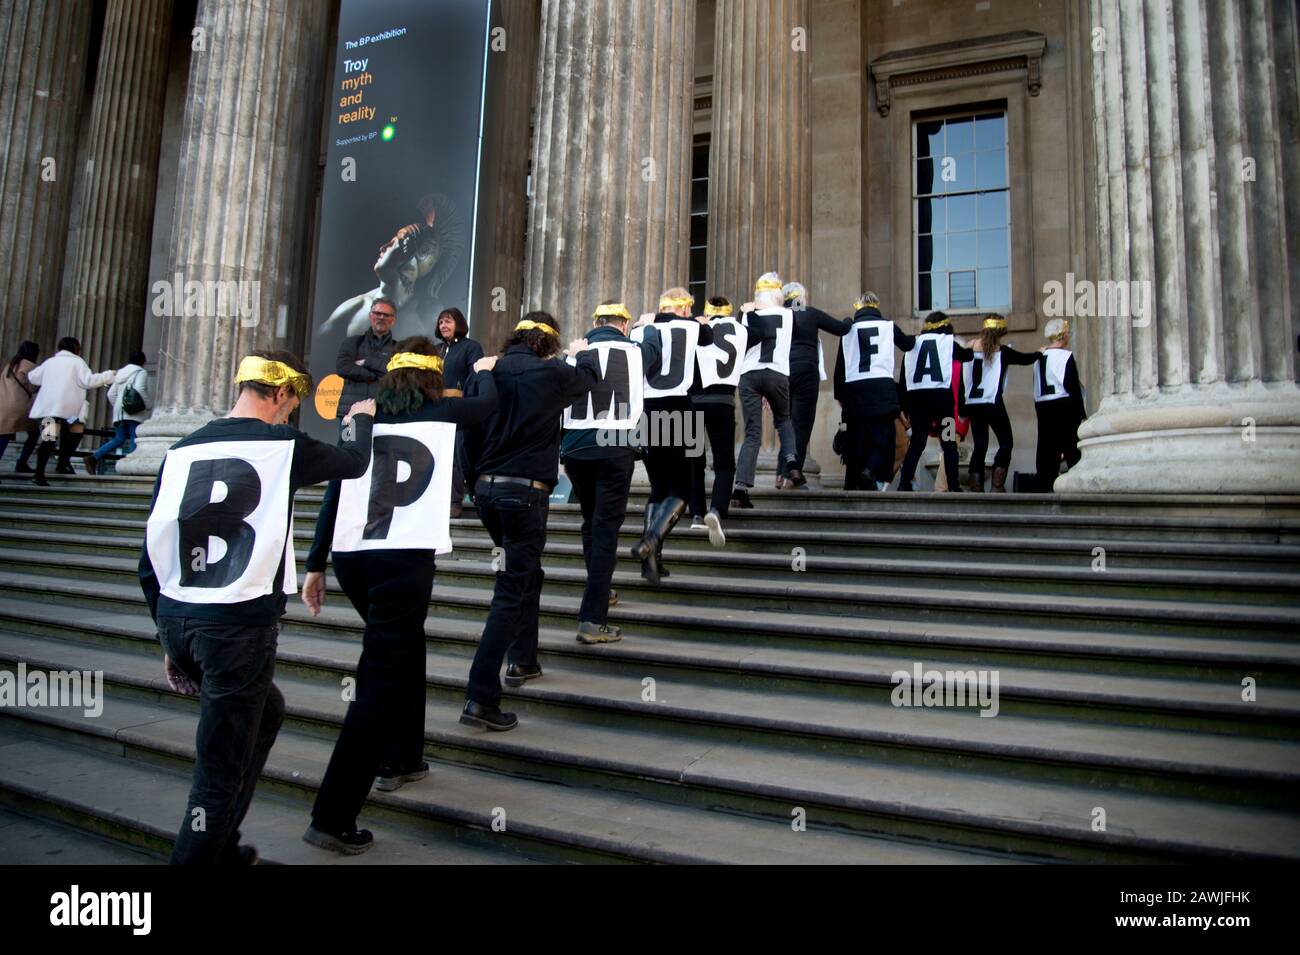 British Museum London February 8th 2020. Protest against the sponsorship of the exhibition Troy, Myth and Reality by BP (British Petroleum ). Proteste Stock Photo